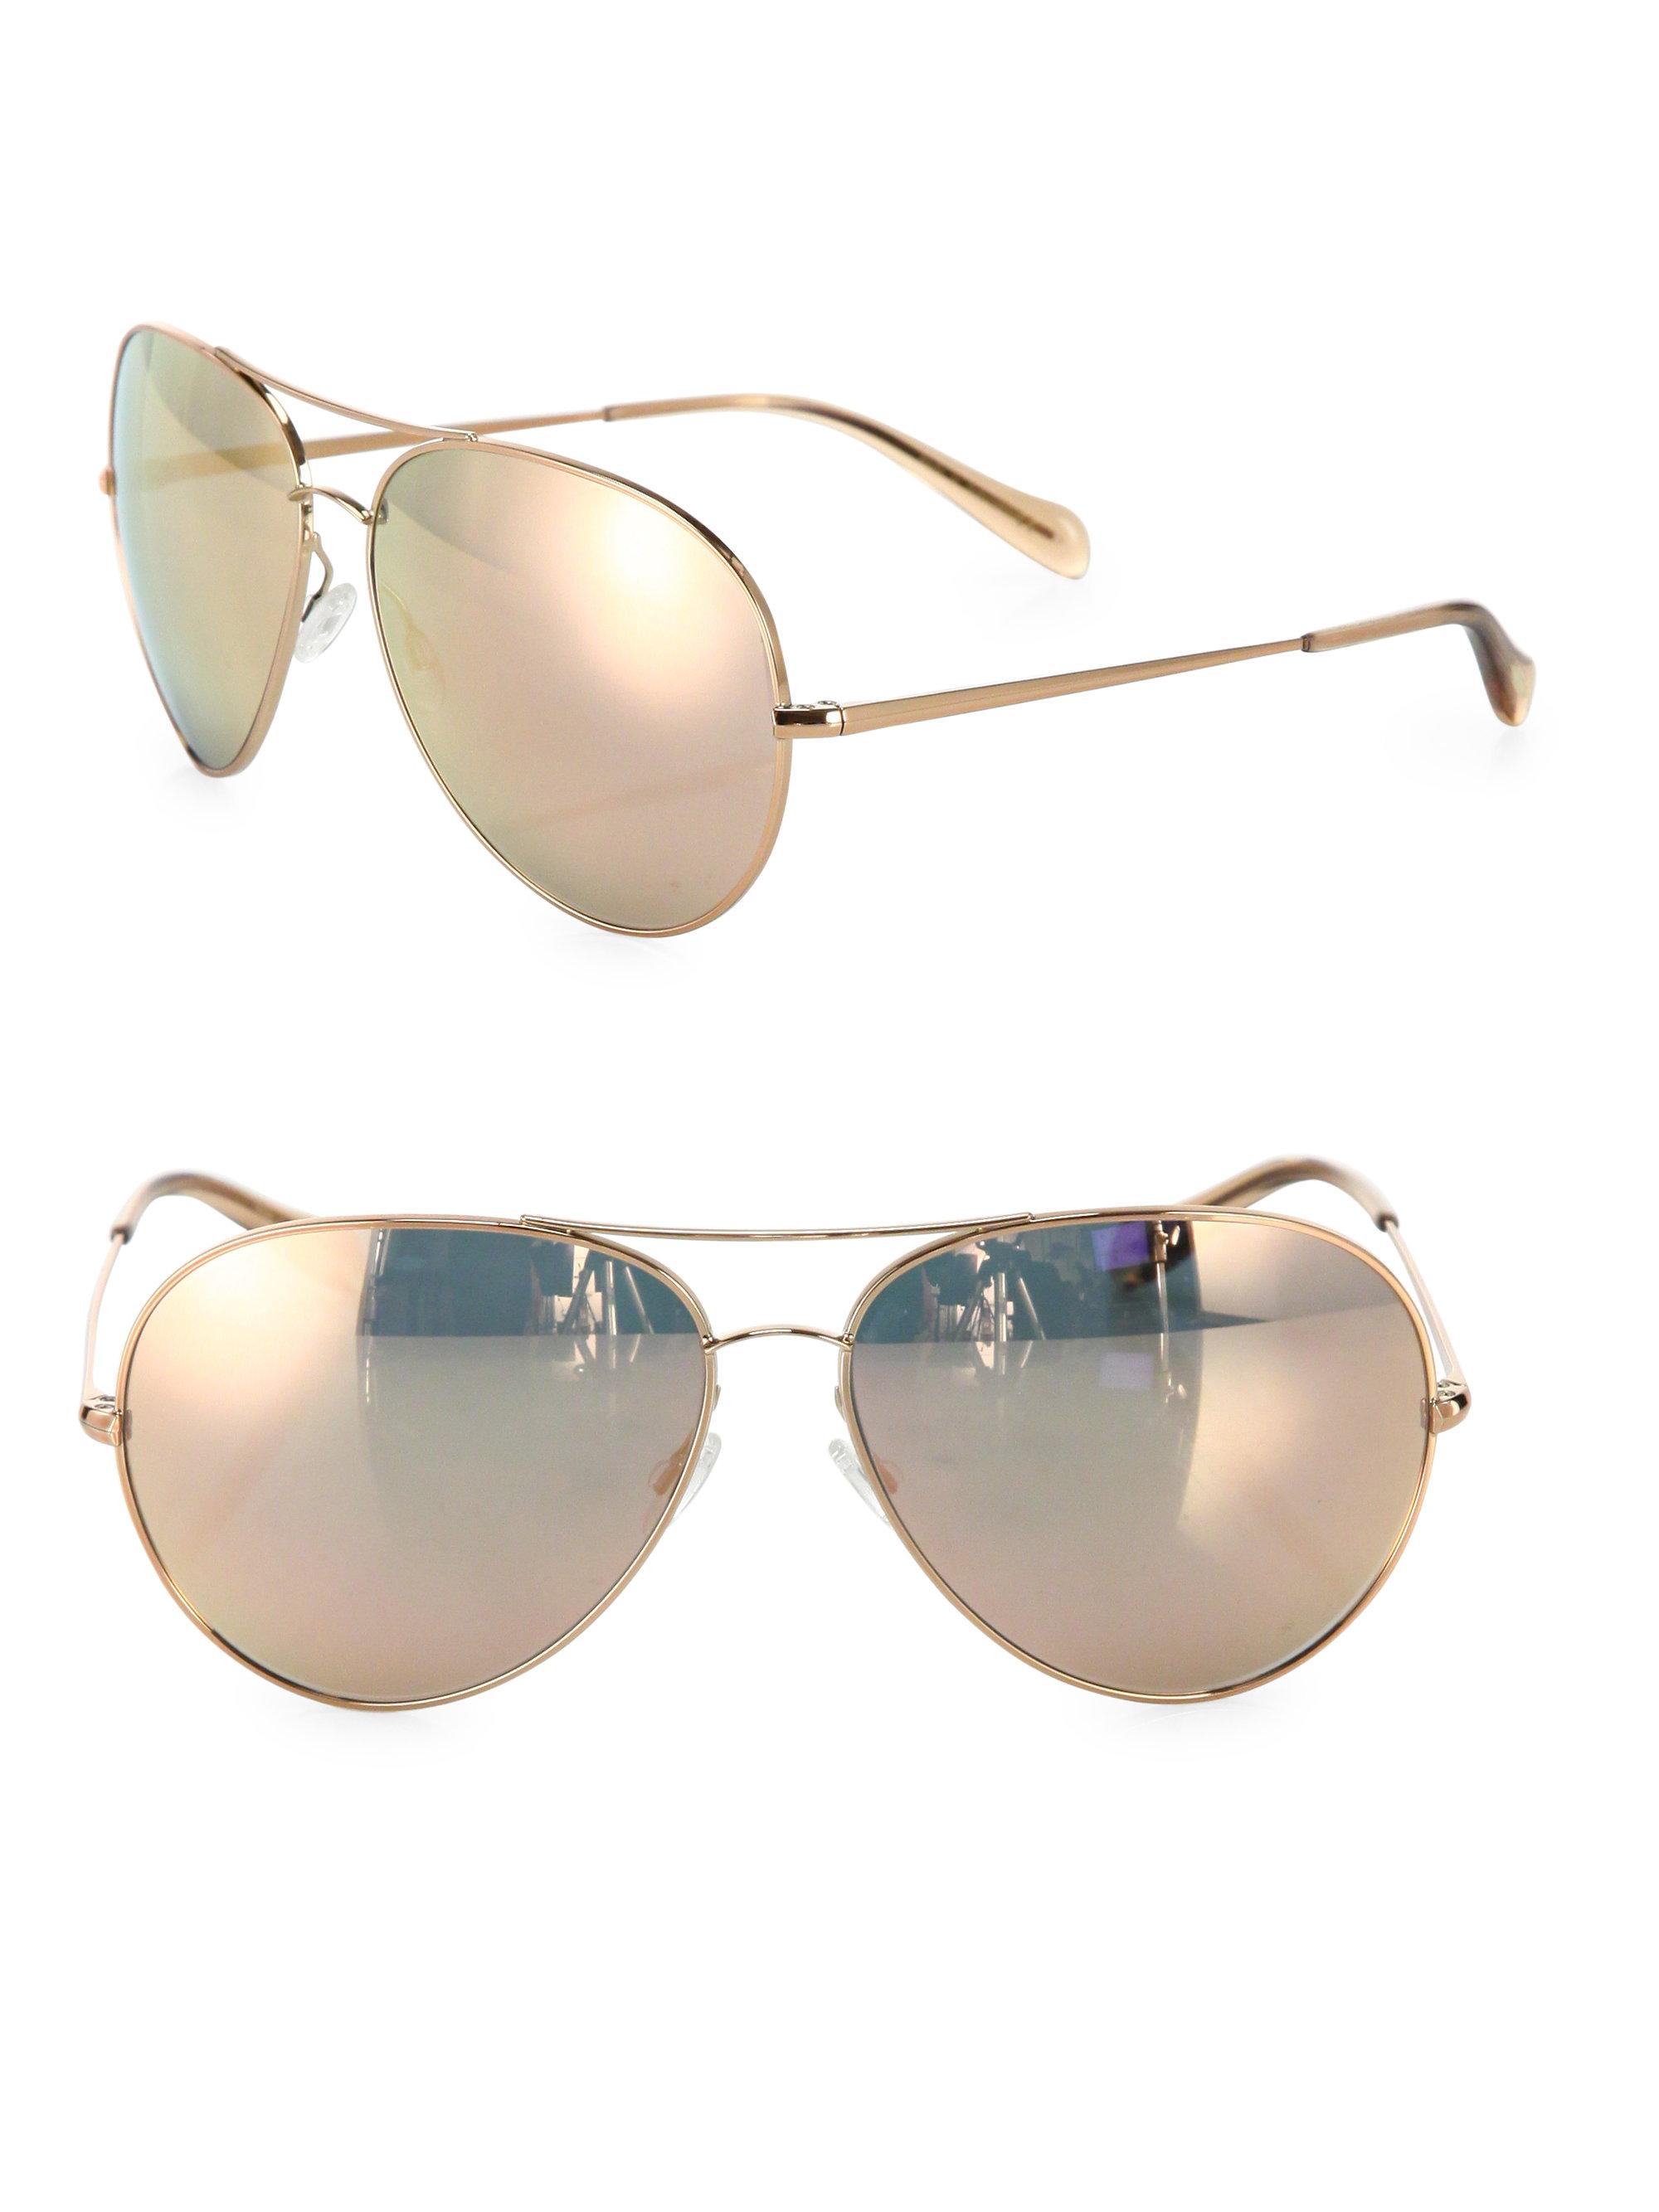 Oliver Peoples Sayer 63mm Mirrored Aviator Sunglasses in Pink - Lyst